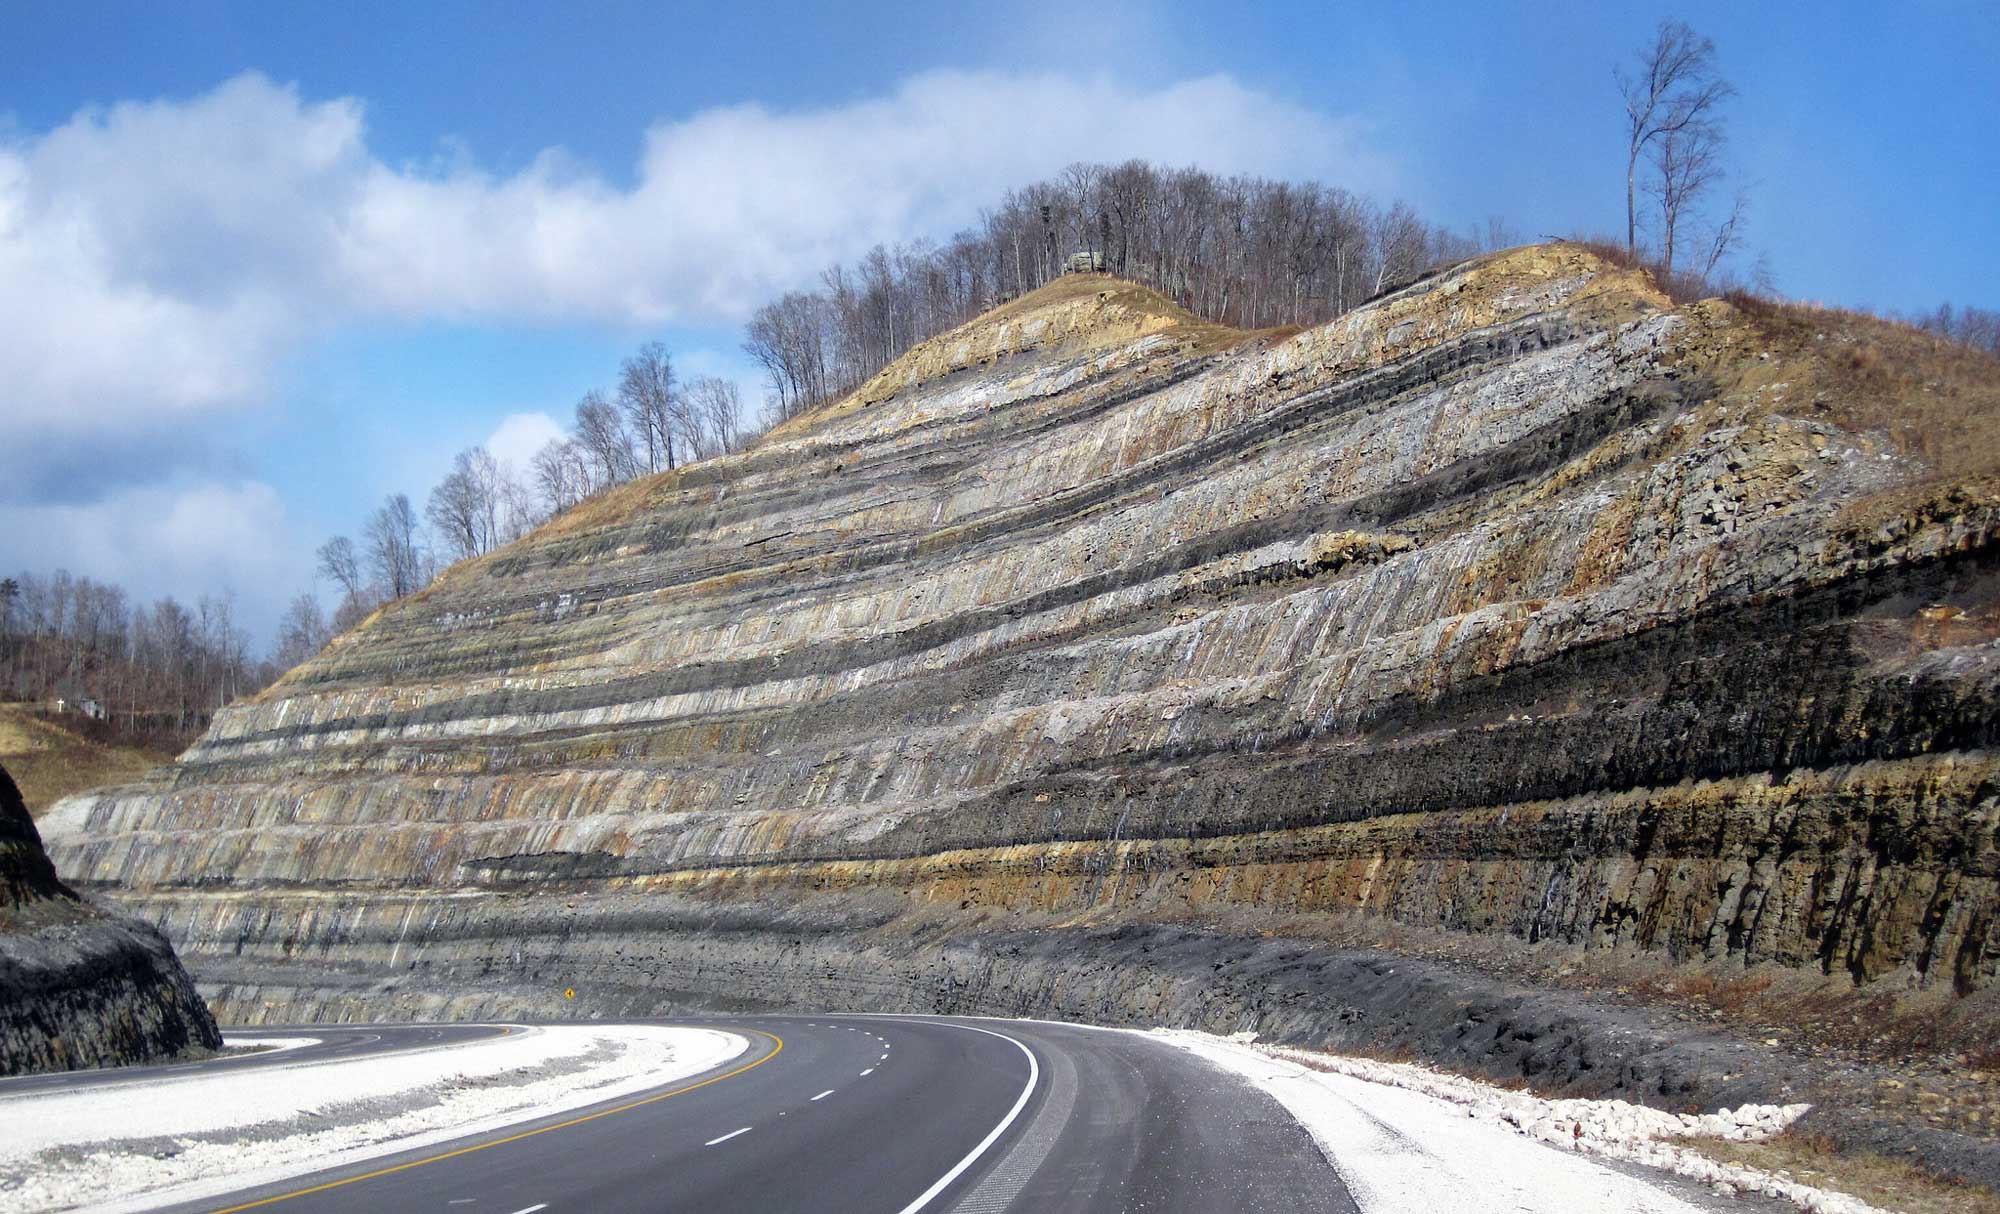 Photograph of a roadcut in Kentucky showing a cyclothem sequence of sedimentary rocks.